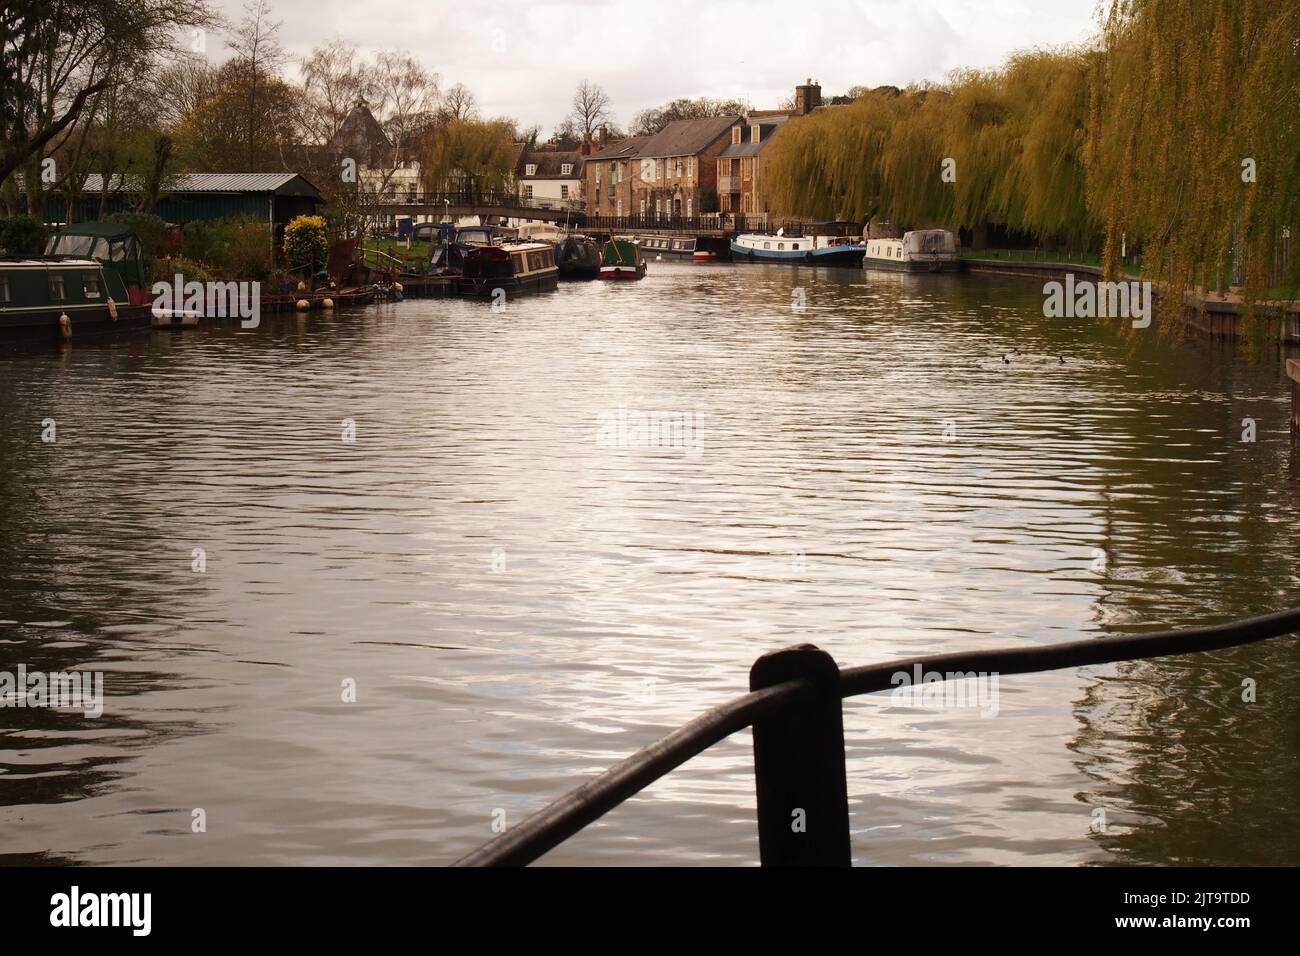 A view of the canal basin at Ely, Cambridgeshire, England, with moored barges, waterside buildings and  weeping willow trees Stock Photo